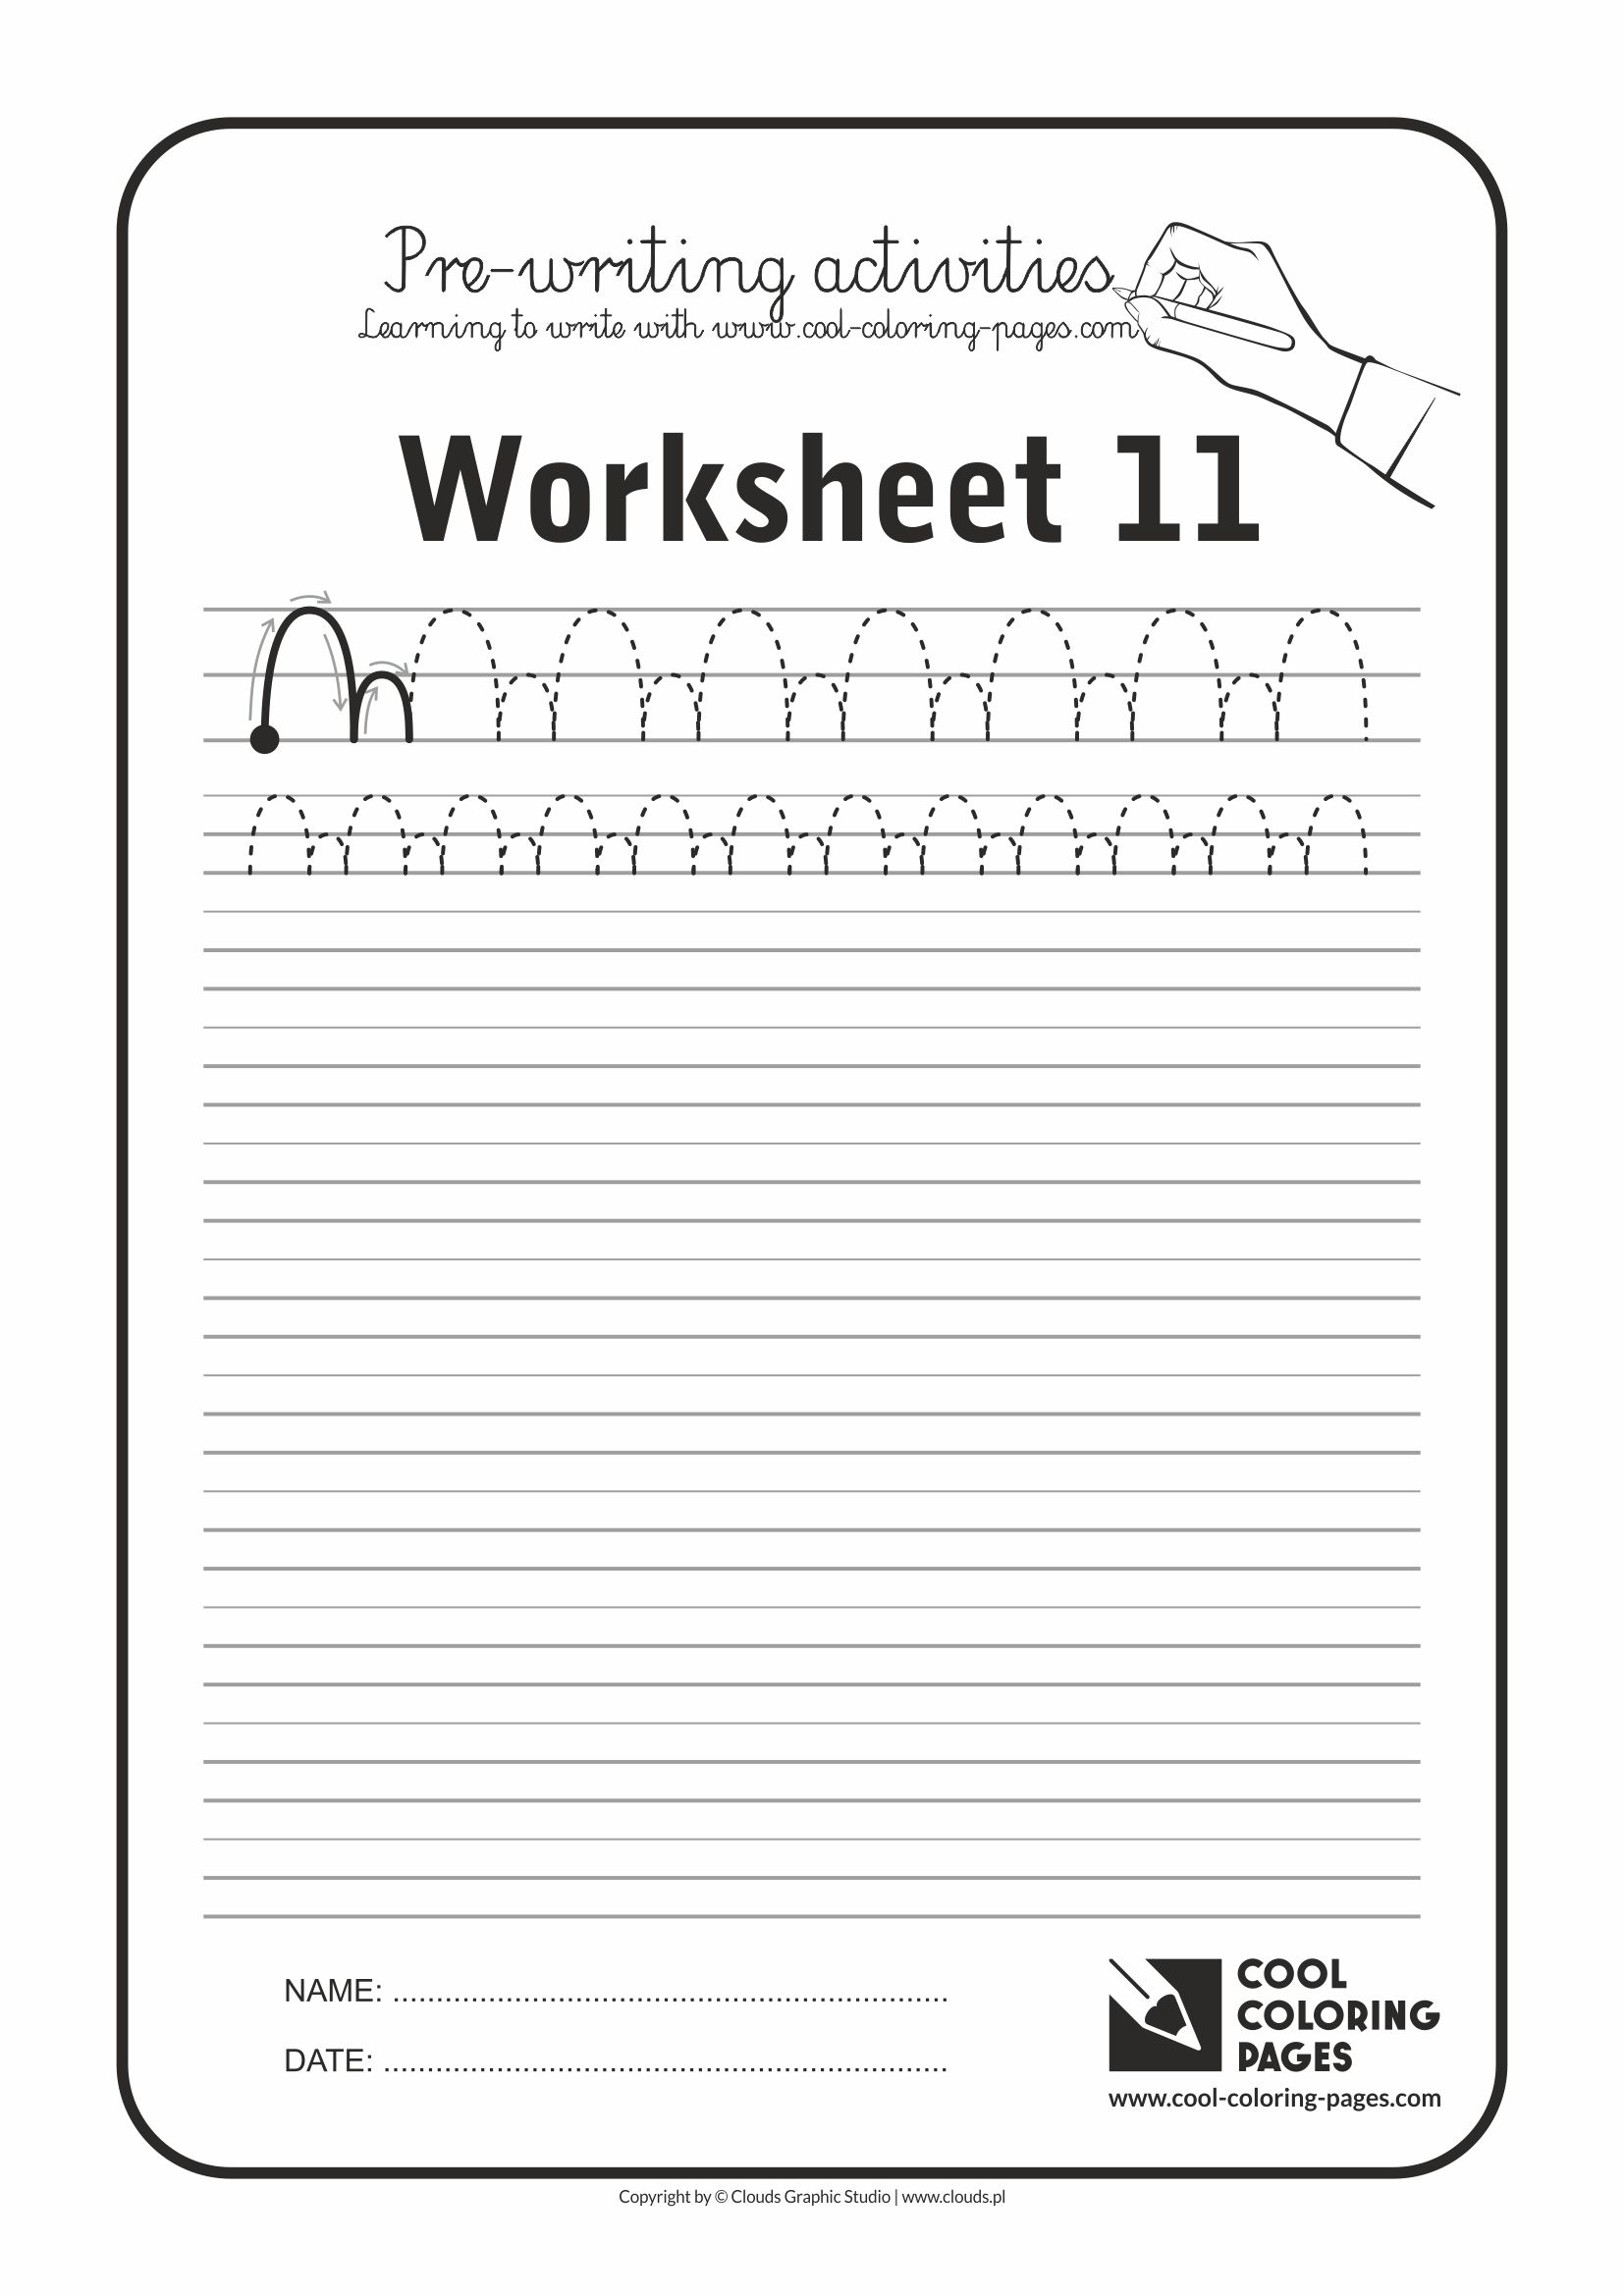 Cool Coloring Pages / Pre-writing activities / Worksheet no.11